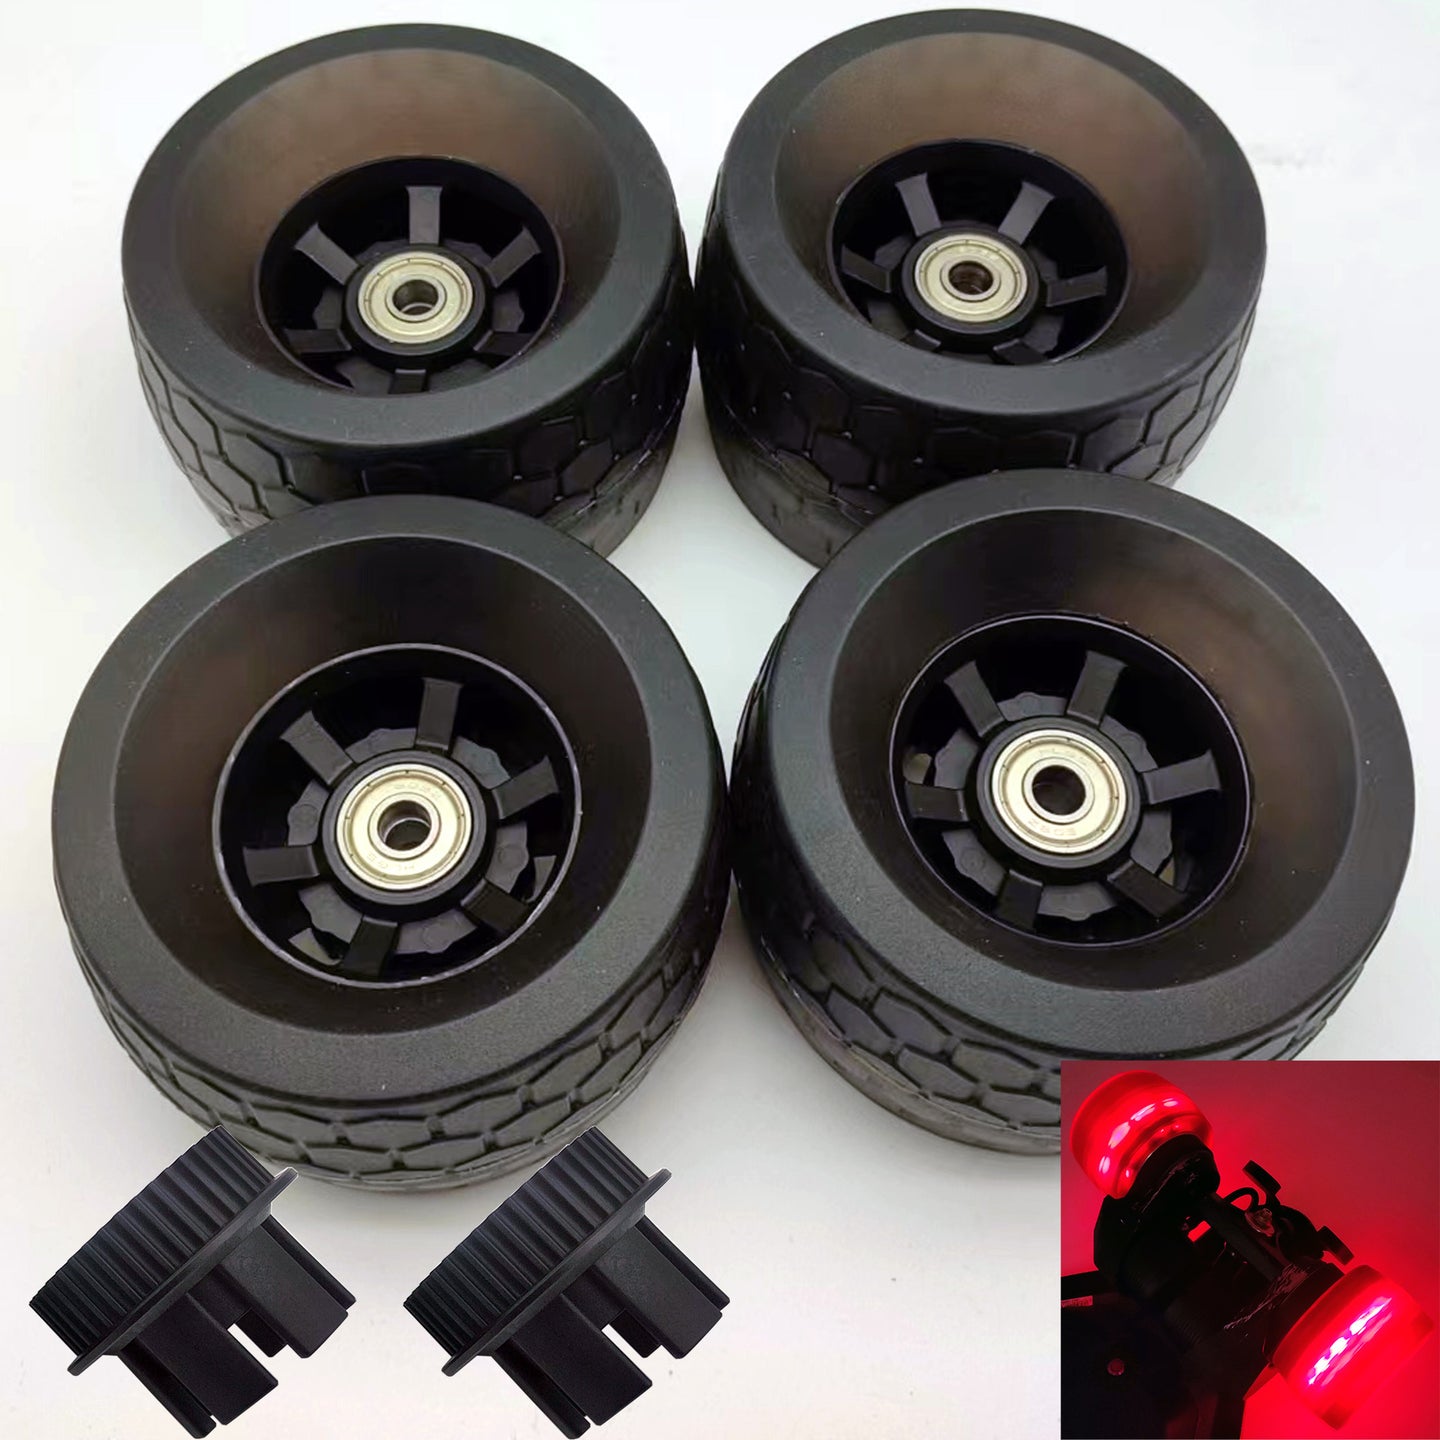 105 mm AT Glow Wheels for electric skateboard 65A